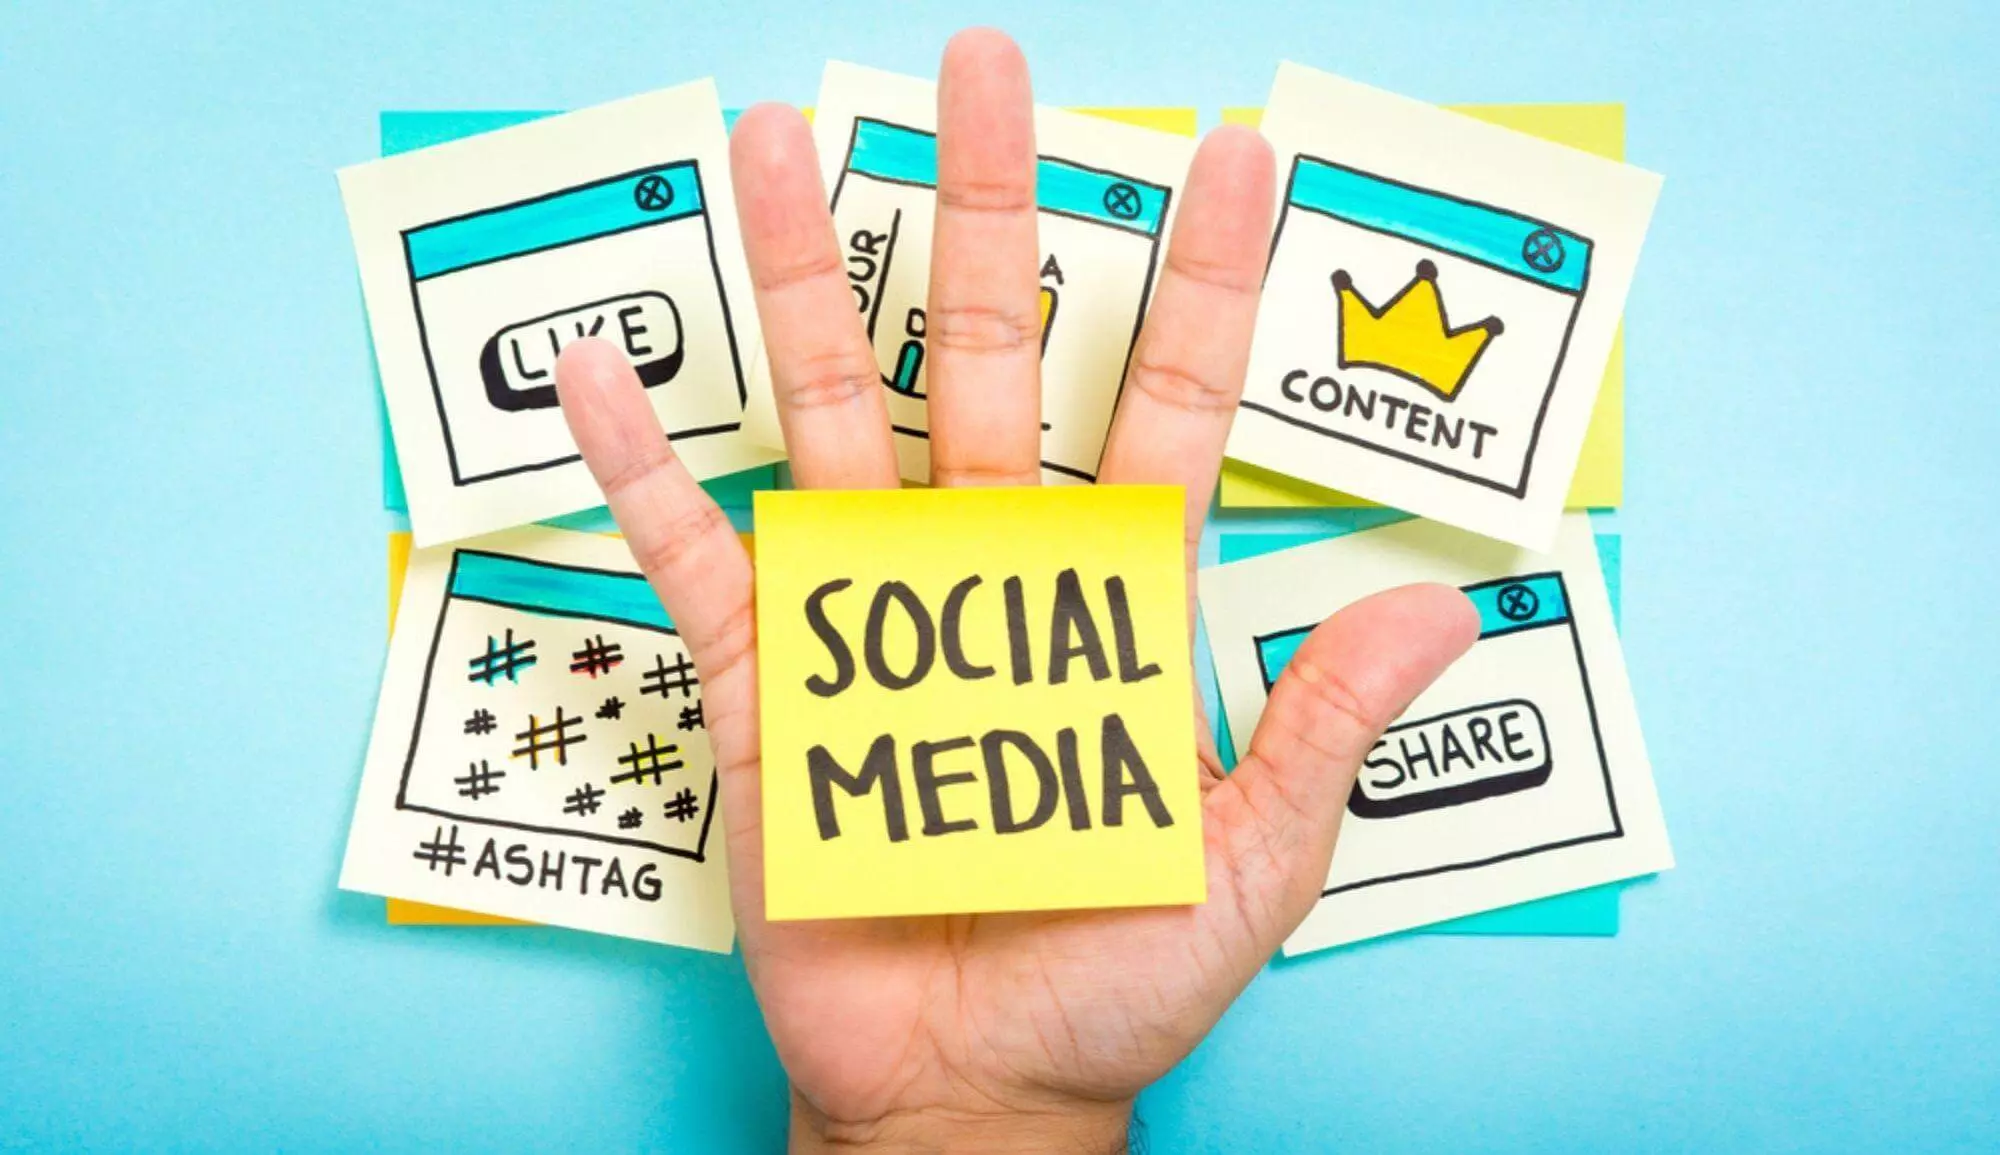 Social media, share, Content, like, hashtag written in yellow and white color sticky notes